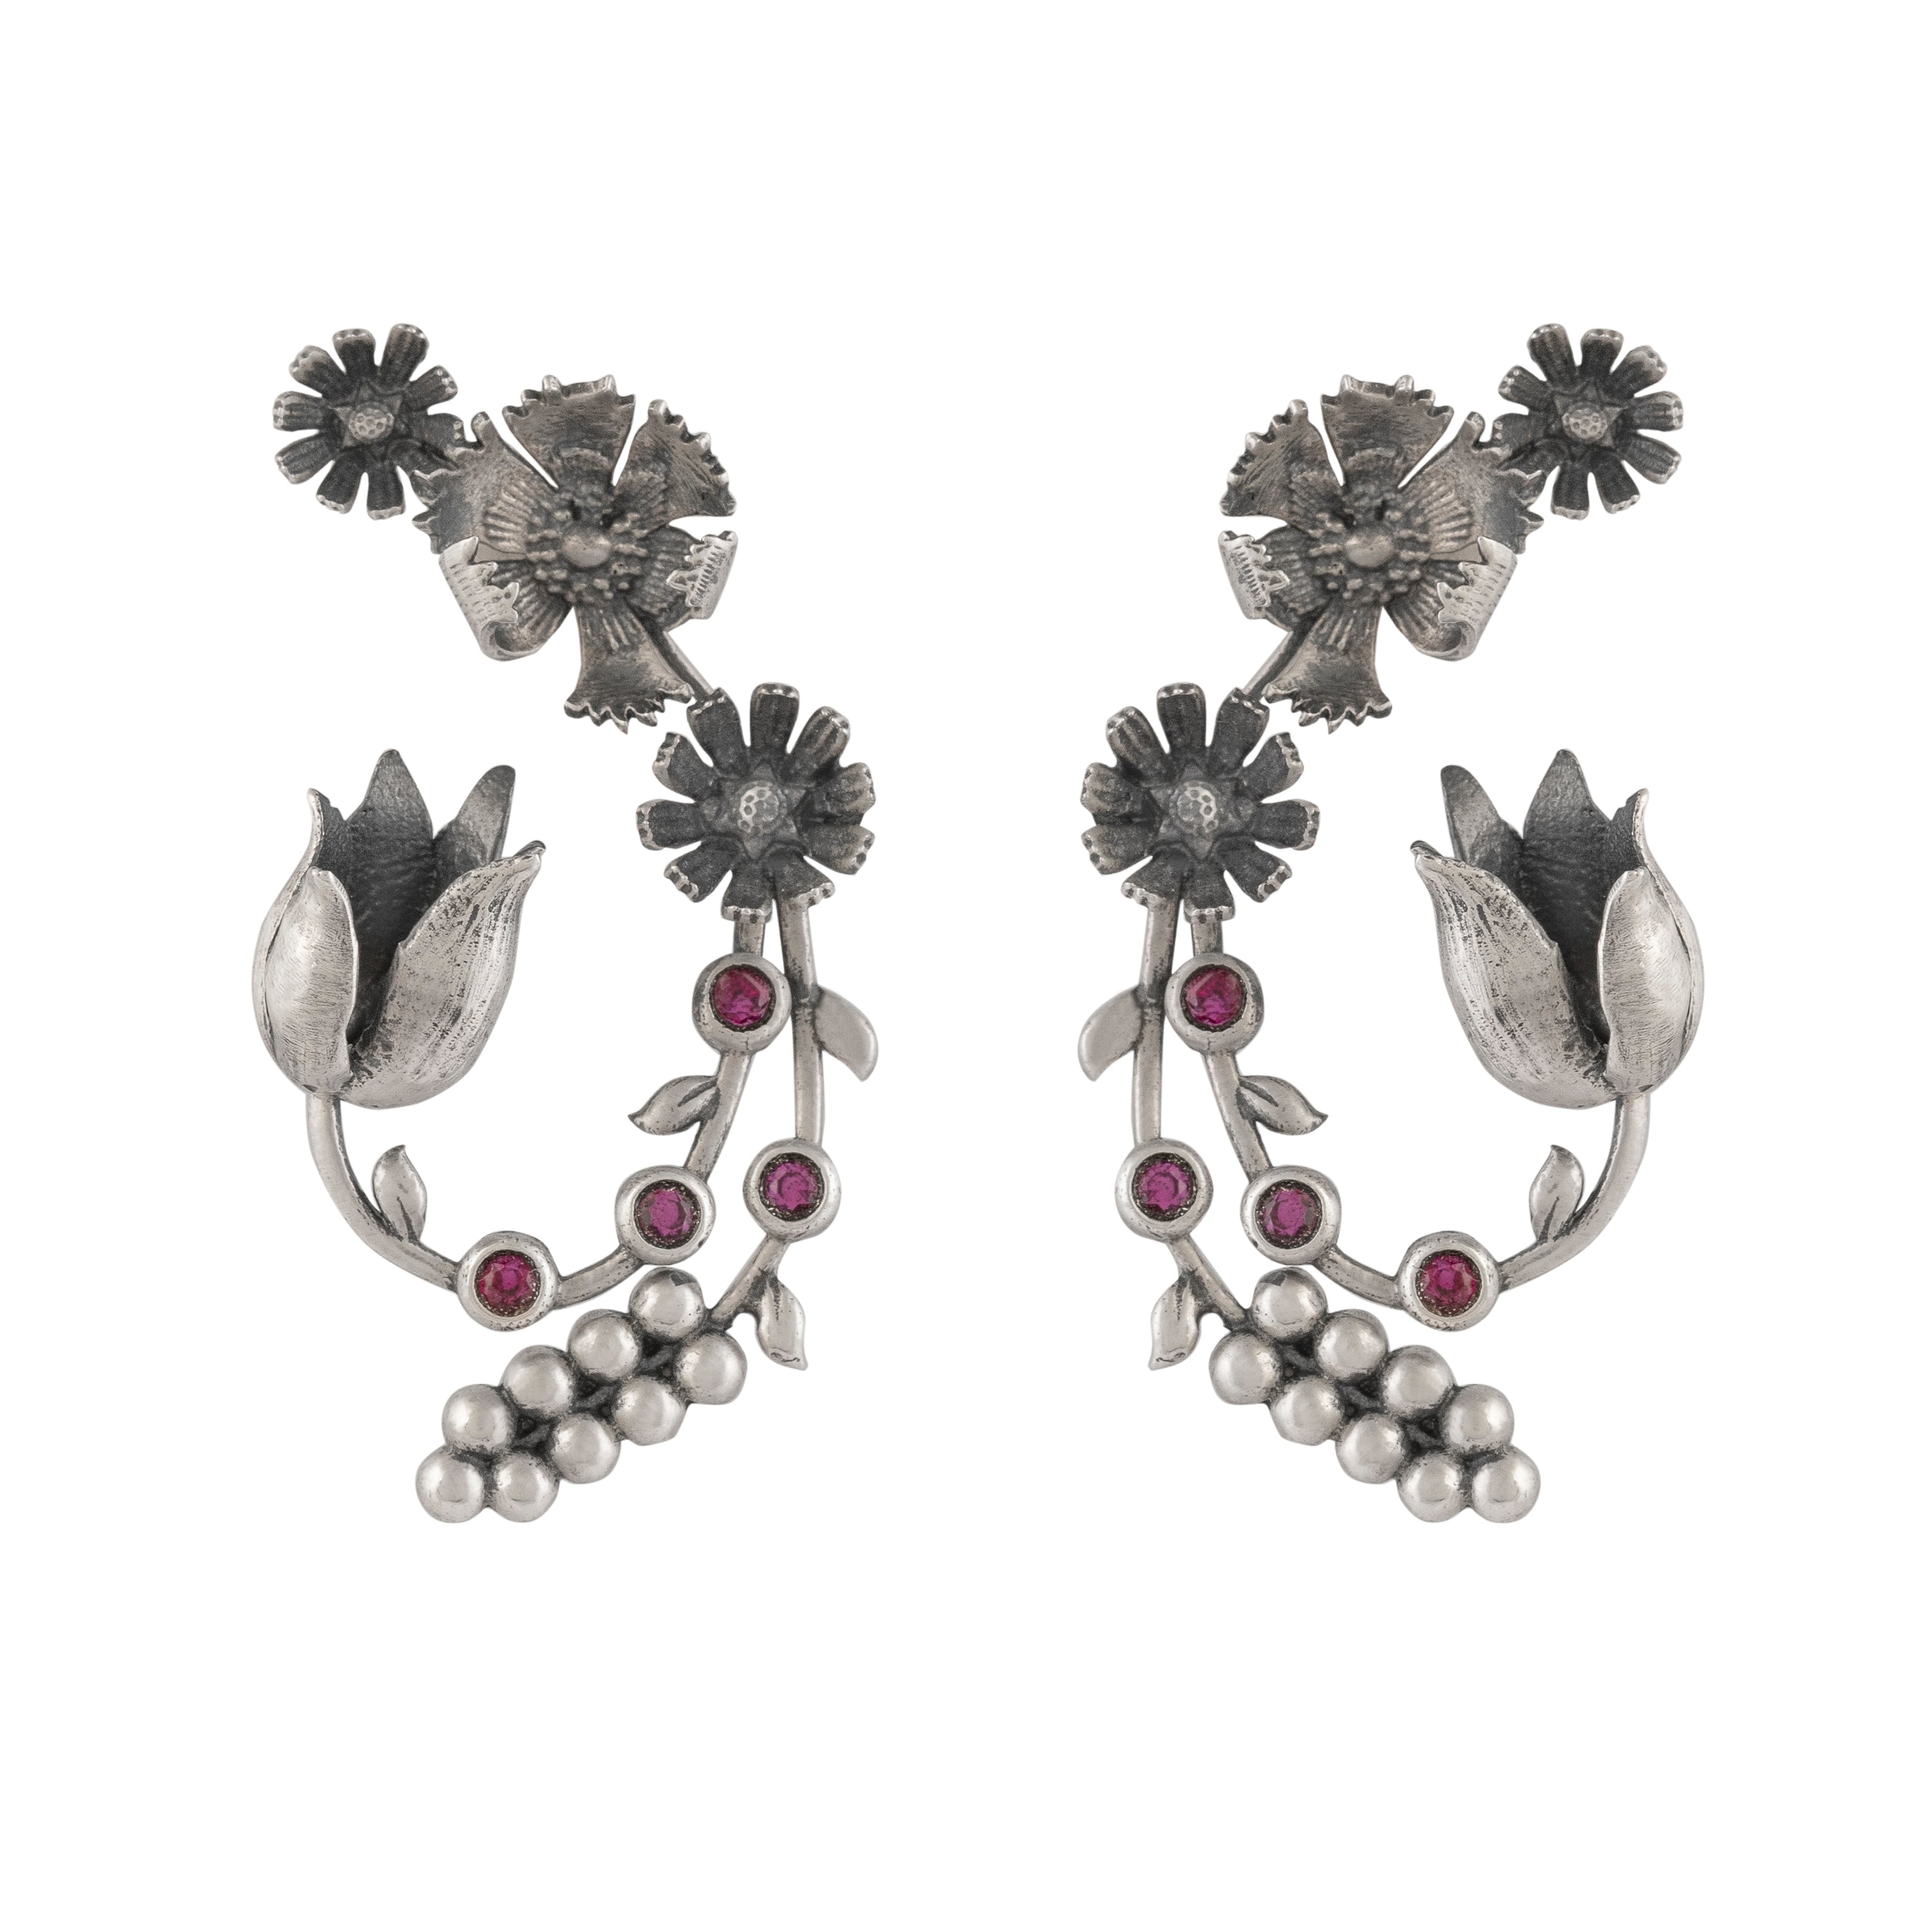 William Morris - Compton Buds Silver Earrings by Moha